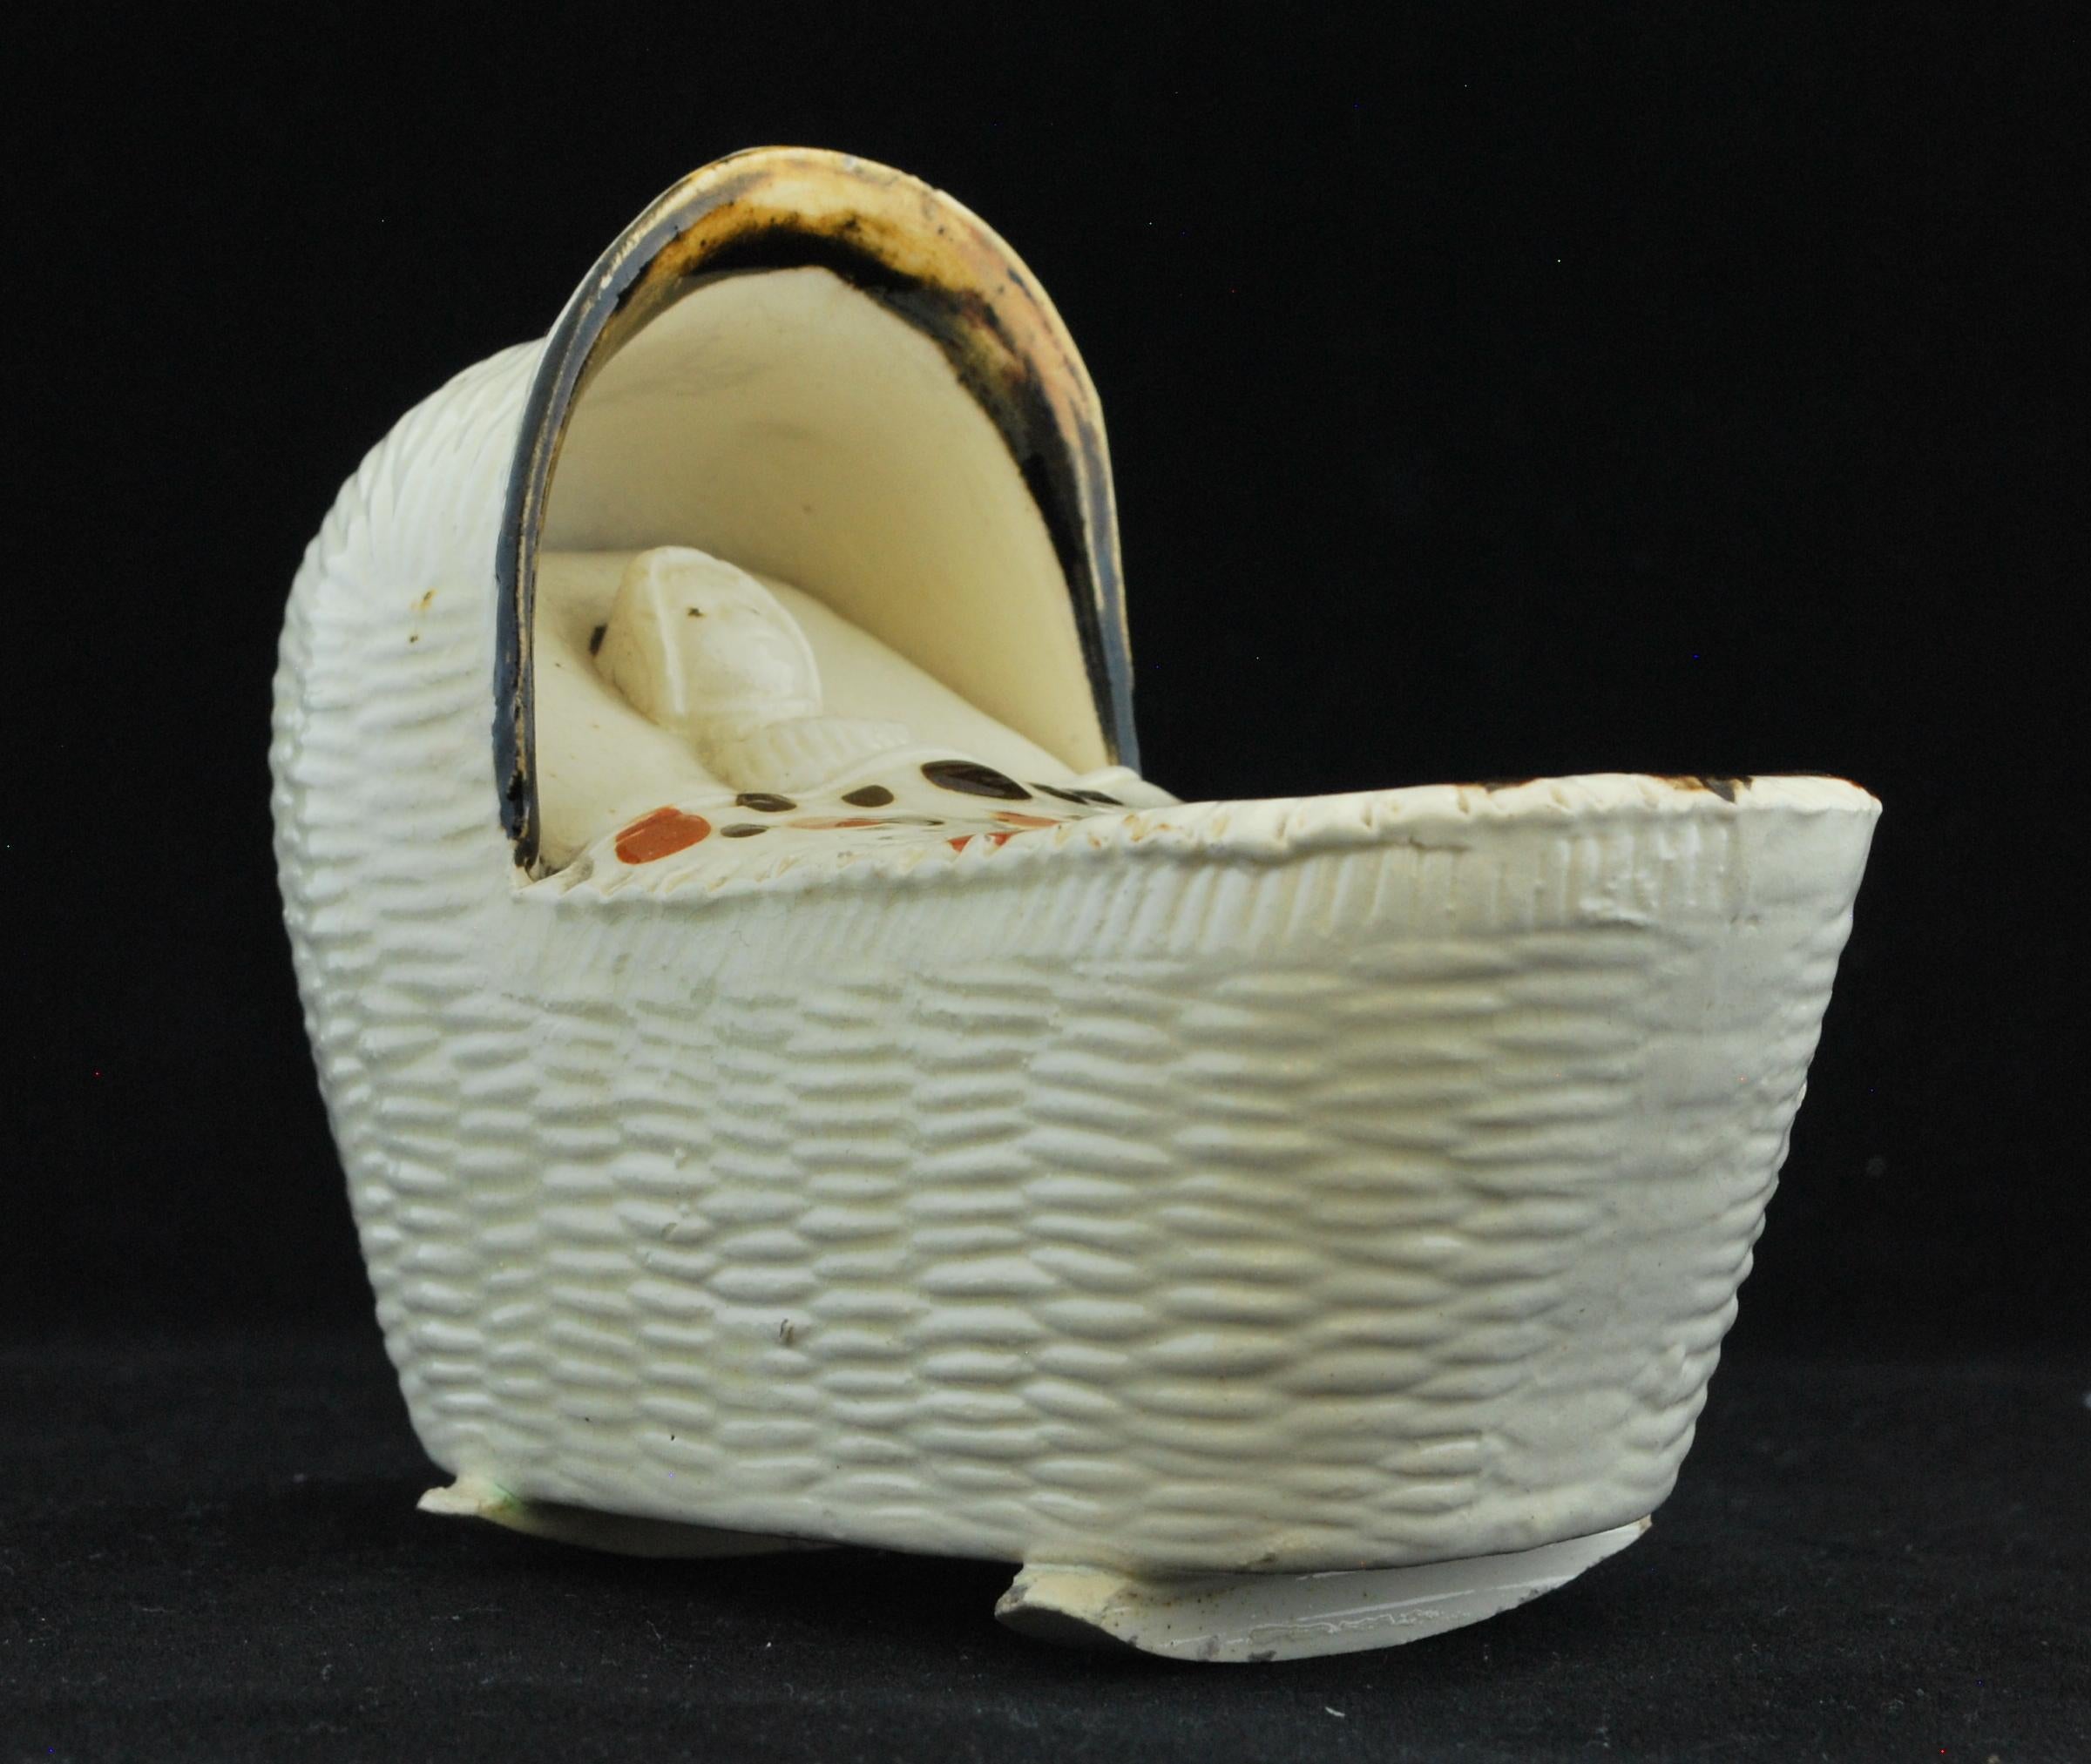 A very fine example in creamware of an infant swaddled and lying in its crib. 

These miniature representations served various purposes:

Decorative objects: Miniature models of infants in cribs were often crafted as decorative items for display in